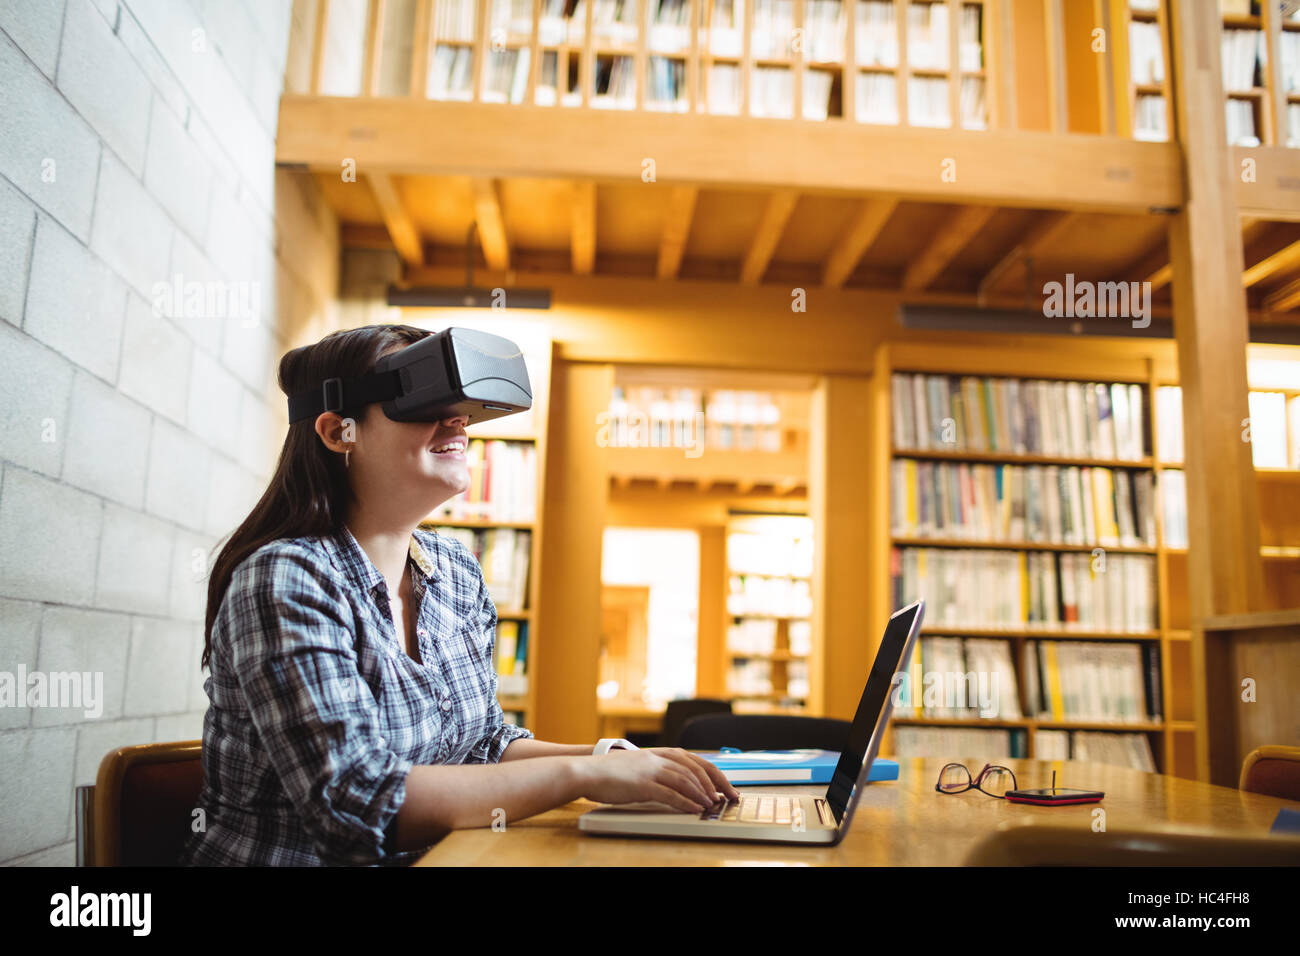 Female student using laptop and virtual reality headset in library Stock Photo